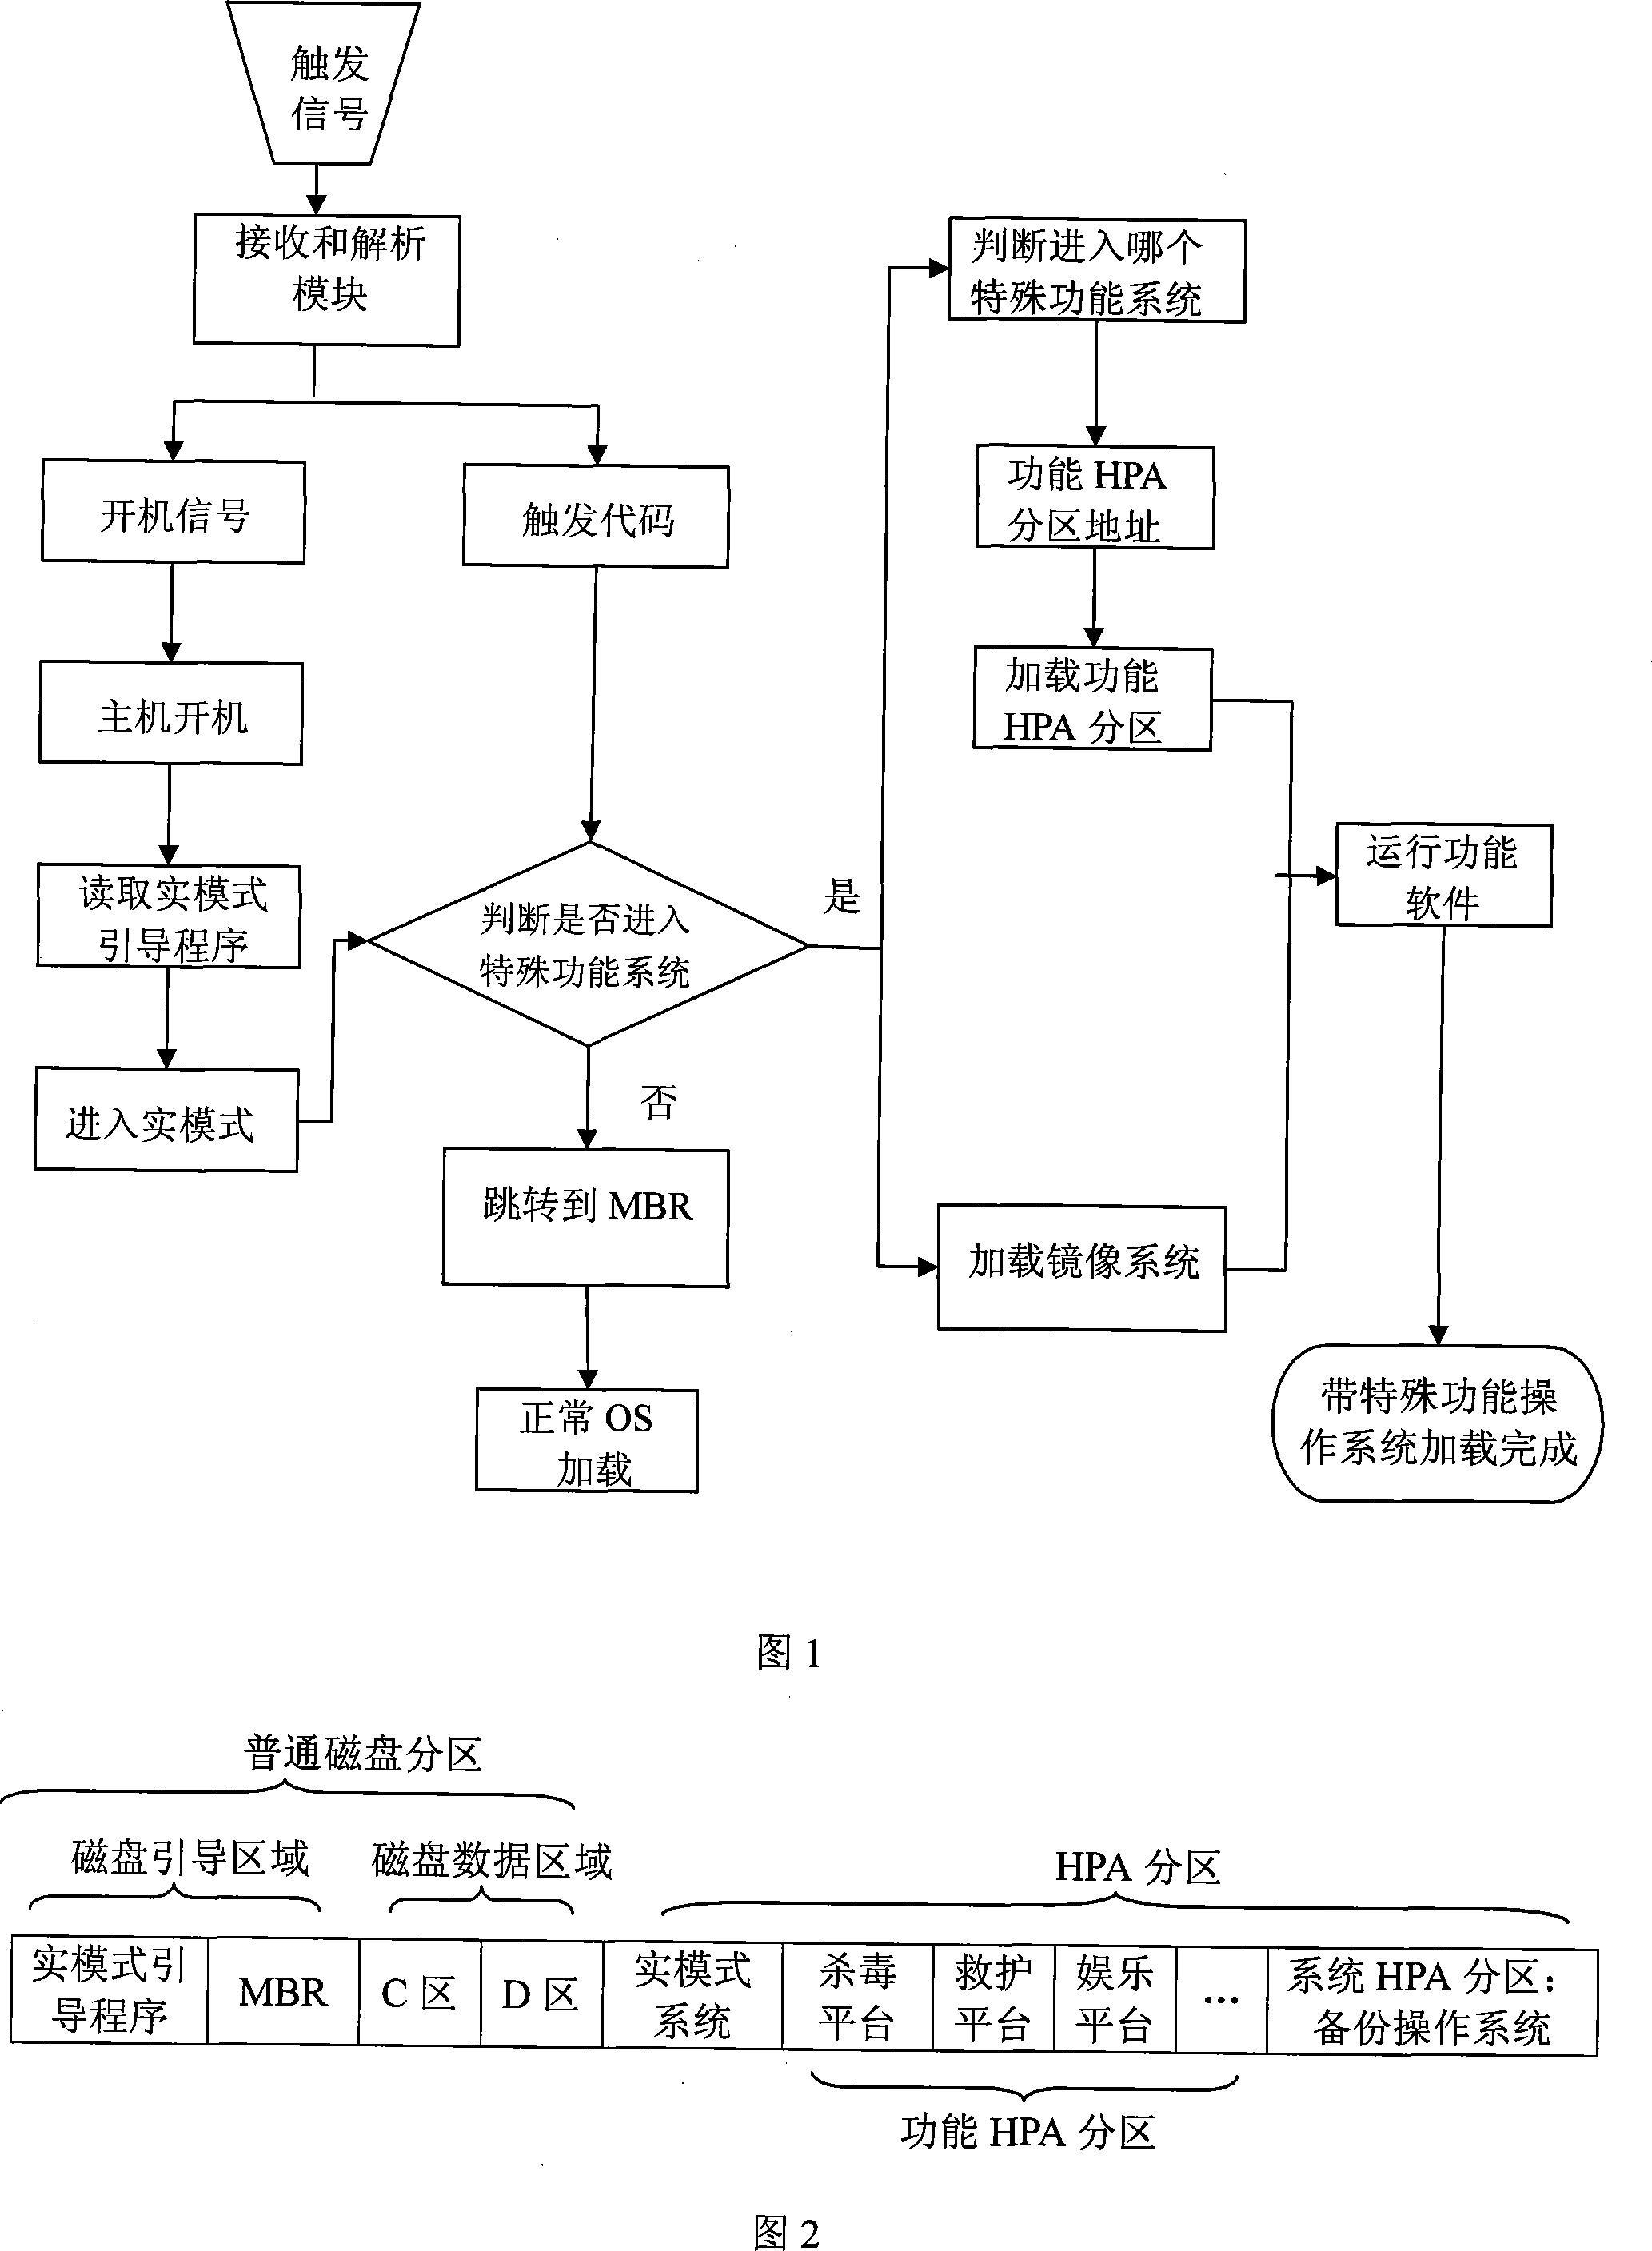 Recovery method of computer system